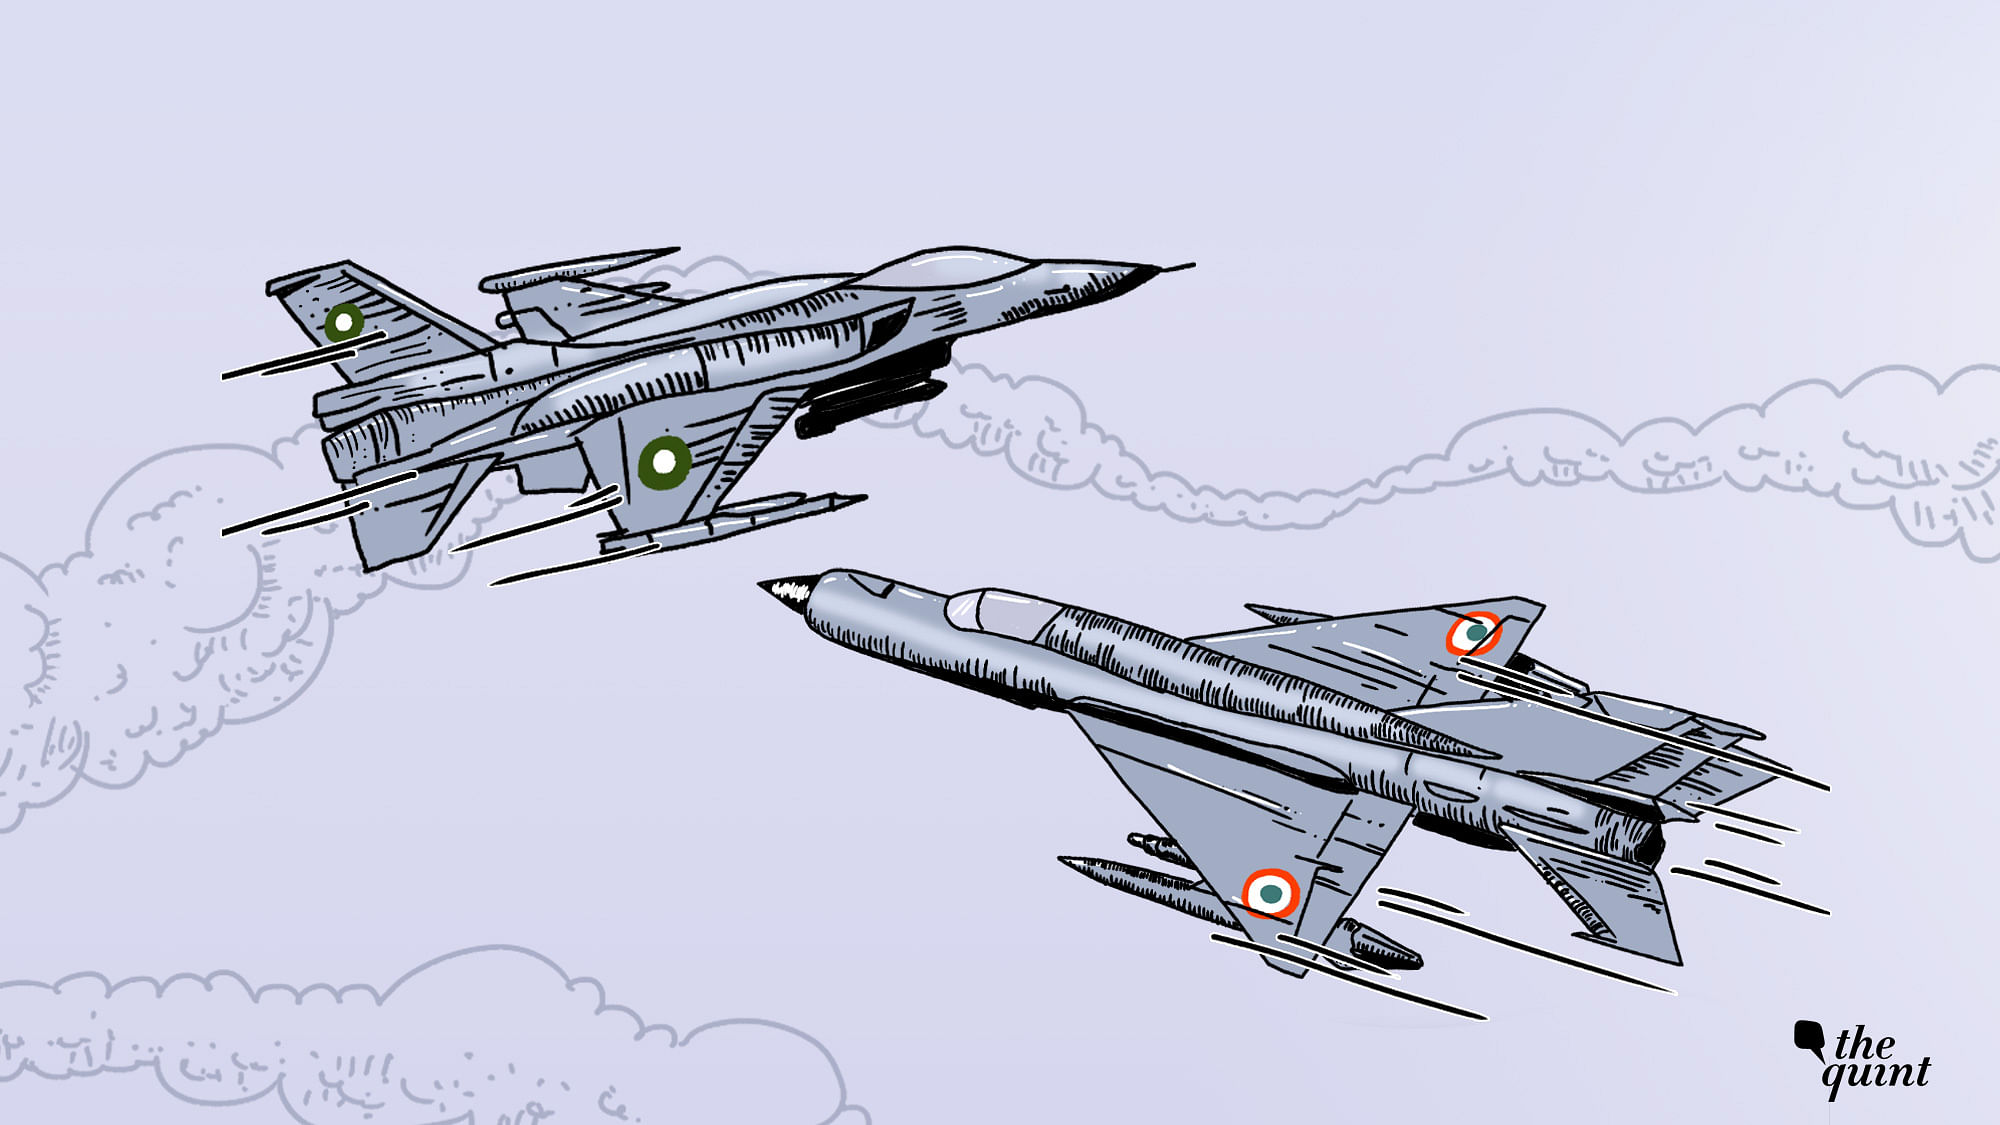 On 28 February, the Indian Air Force claimed that a Pakistani F-16 fighter jet was shot down by an Indian MiG -21 Bison.